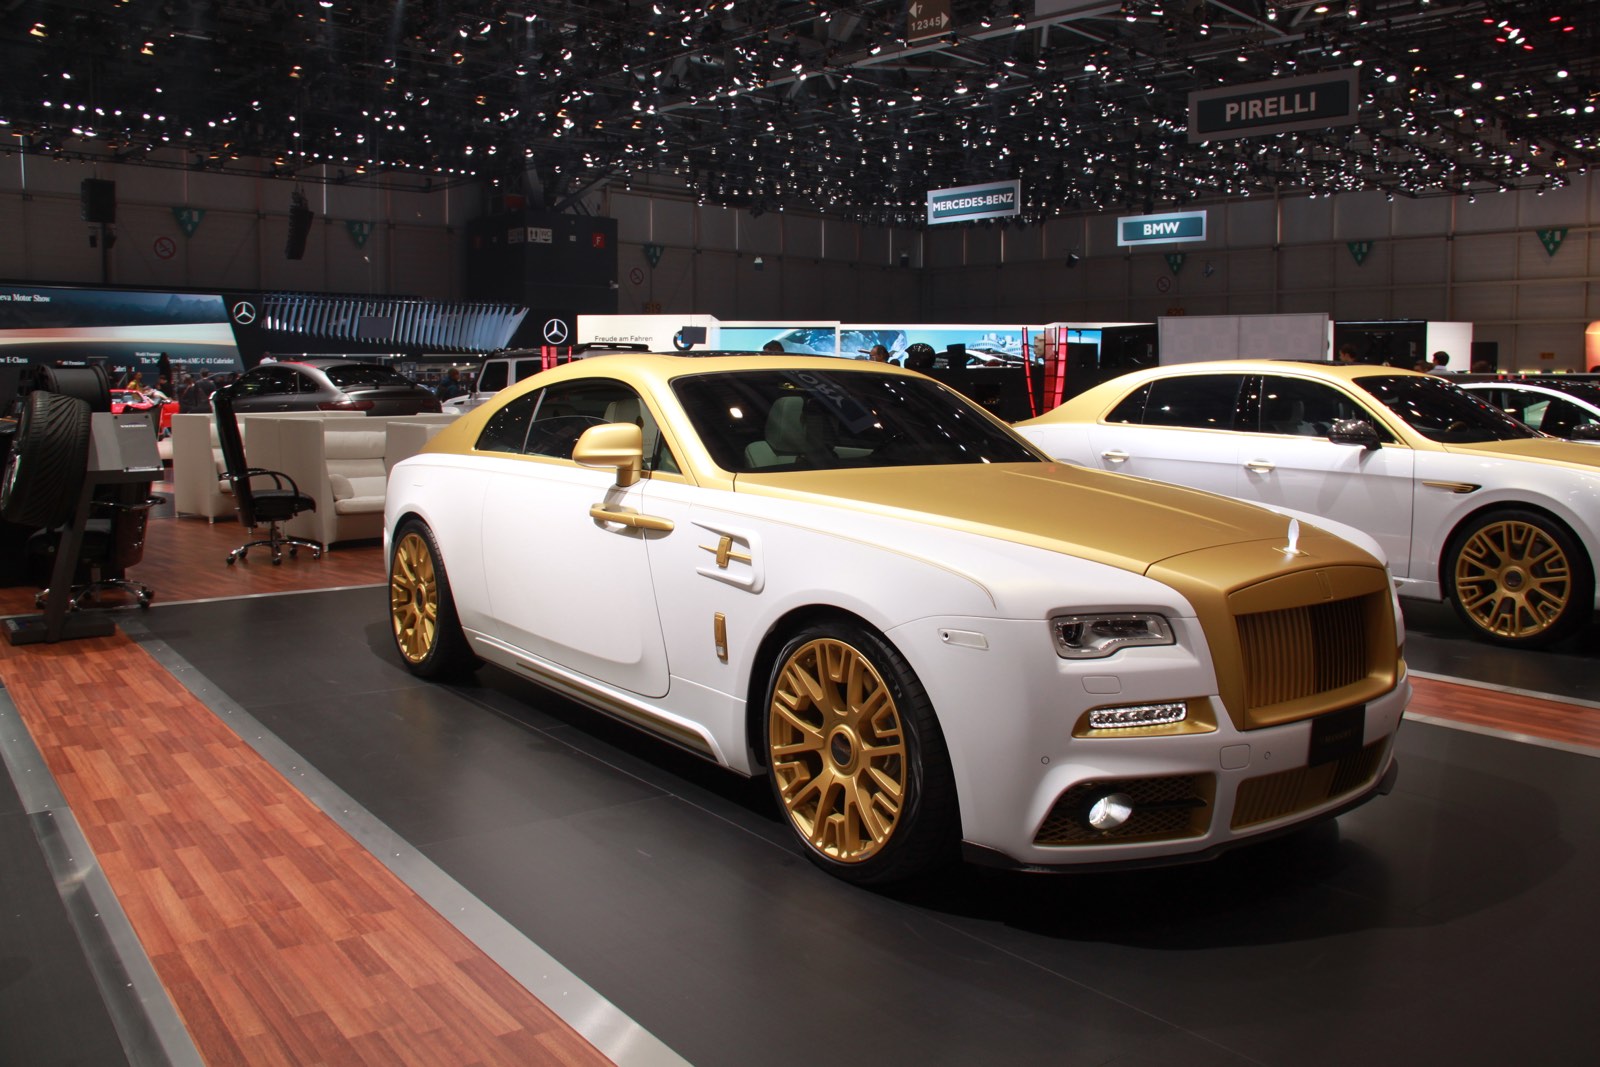 Mansory Rolls-royce Wraith Backgrounds on Wallpapers Vista